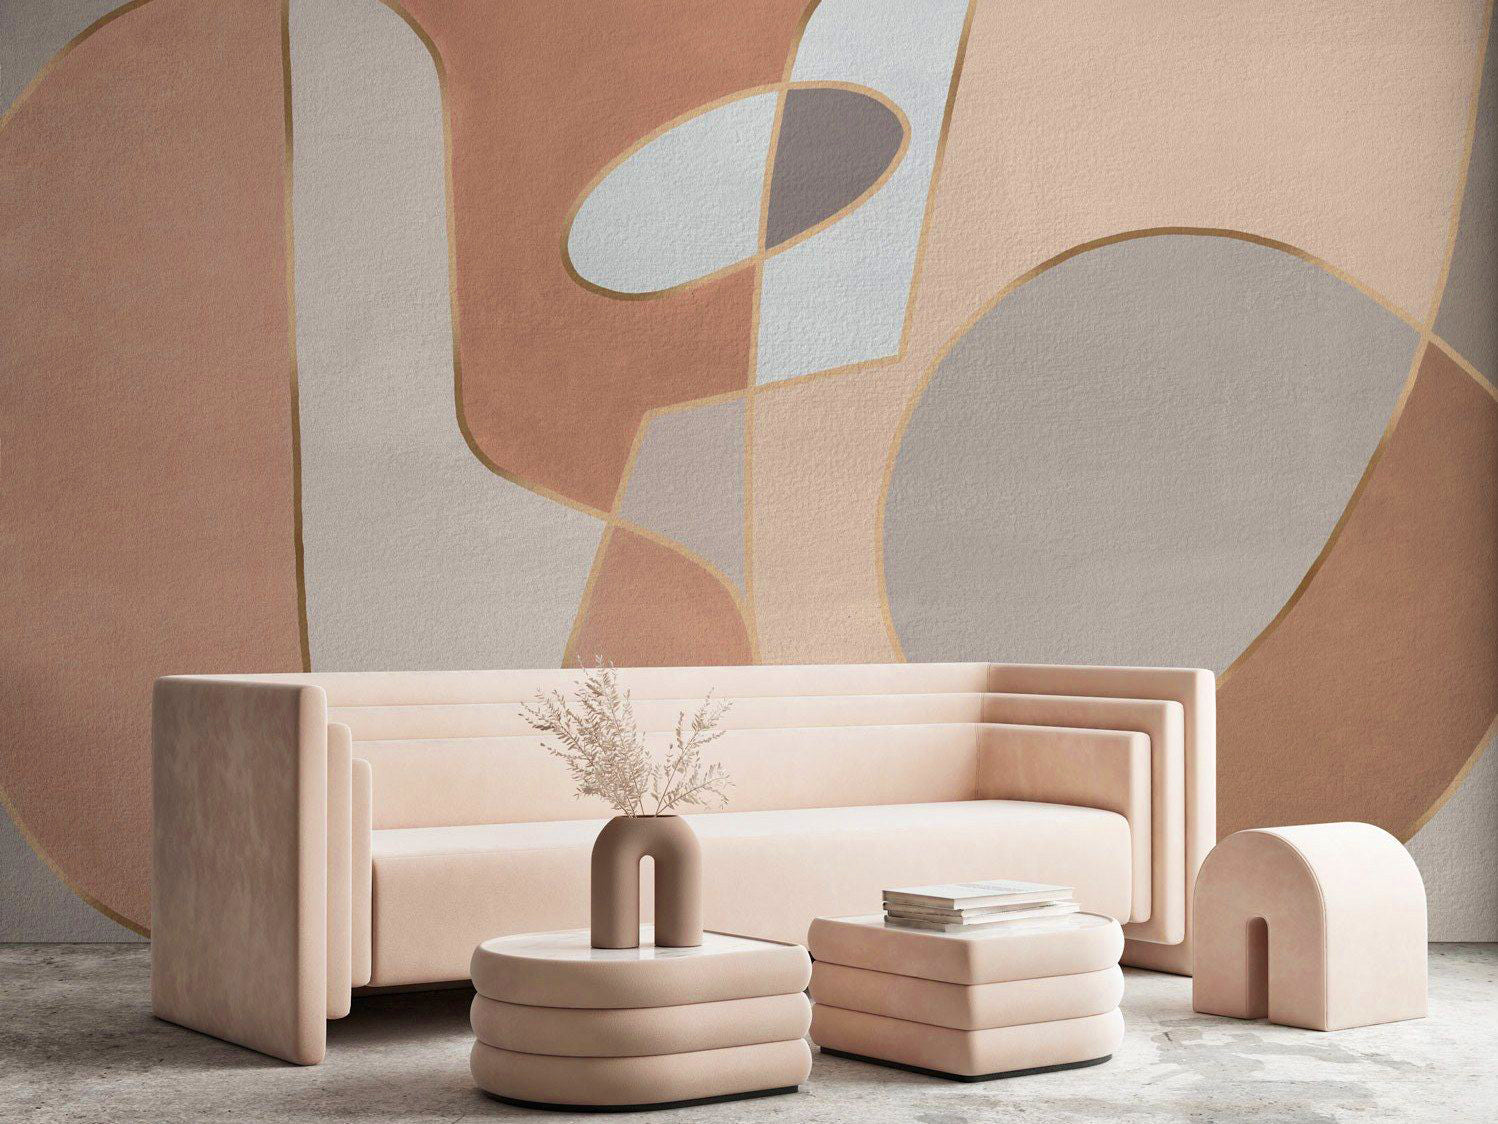 Spacio Blog on Pantone Color of the year 2024 featuring Affreschi and Affreschi Wall coverings for modern interiors from our Luxury Art Surface Coverings collection.